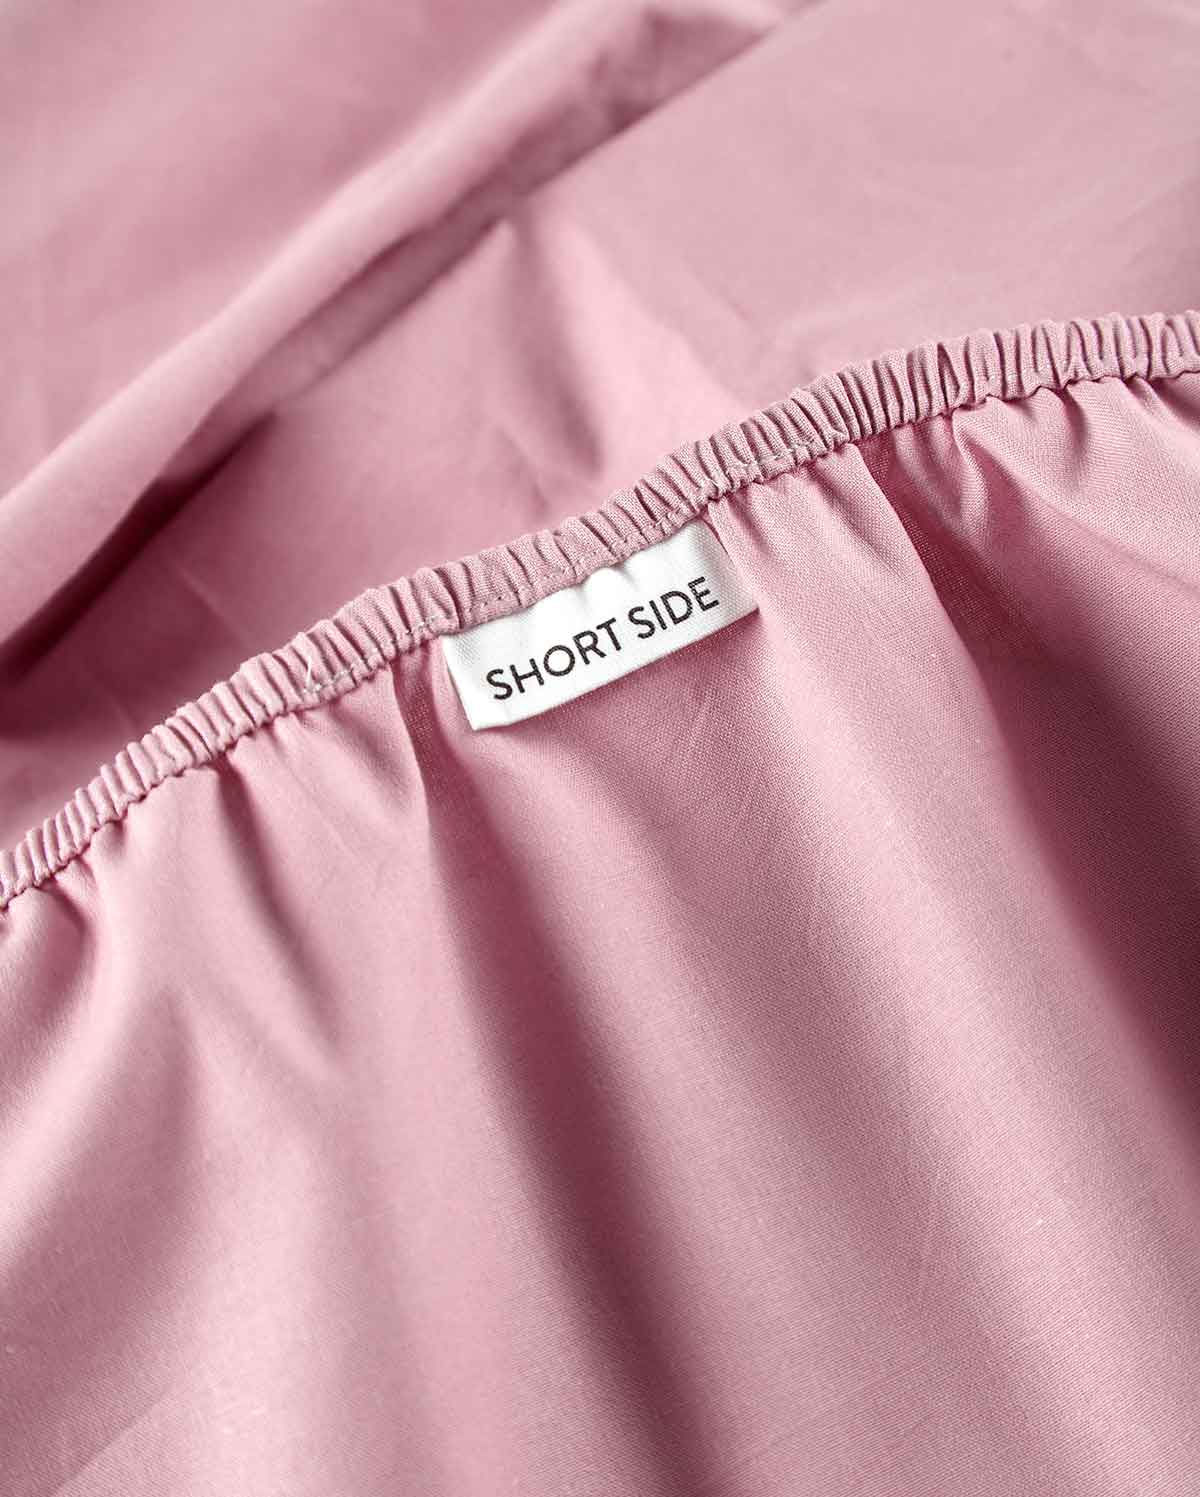 Classic Percale - Fitted Sheet Set - Pink